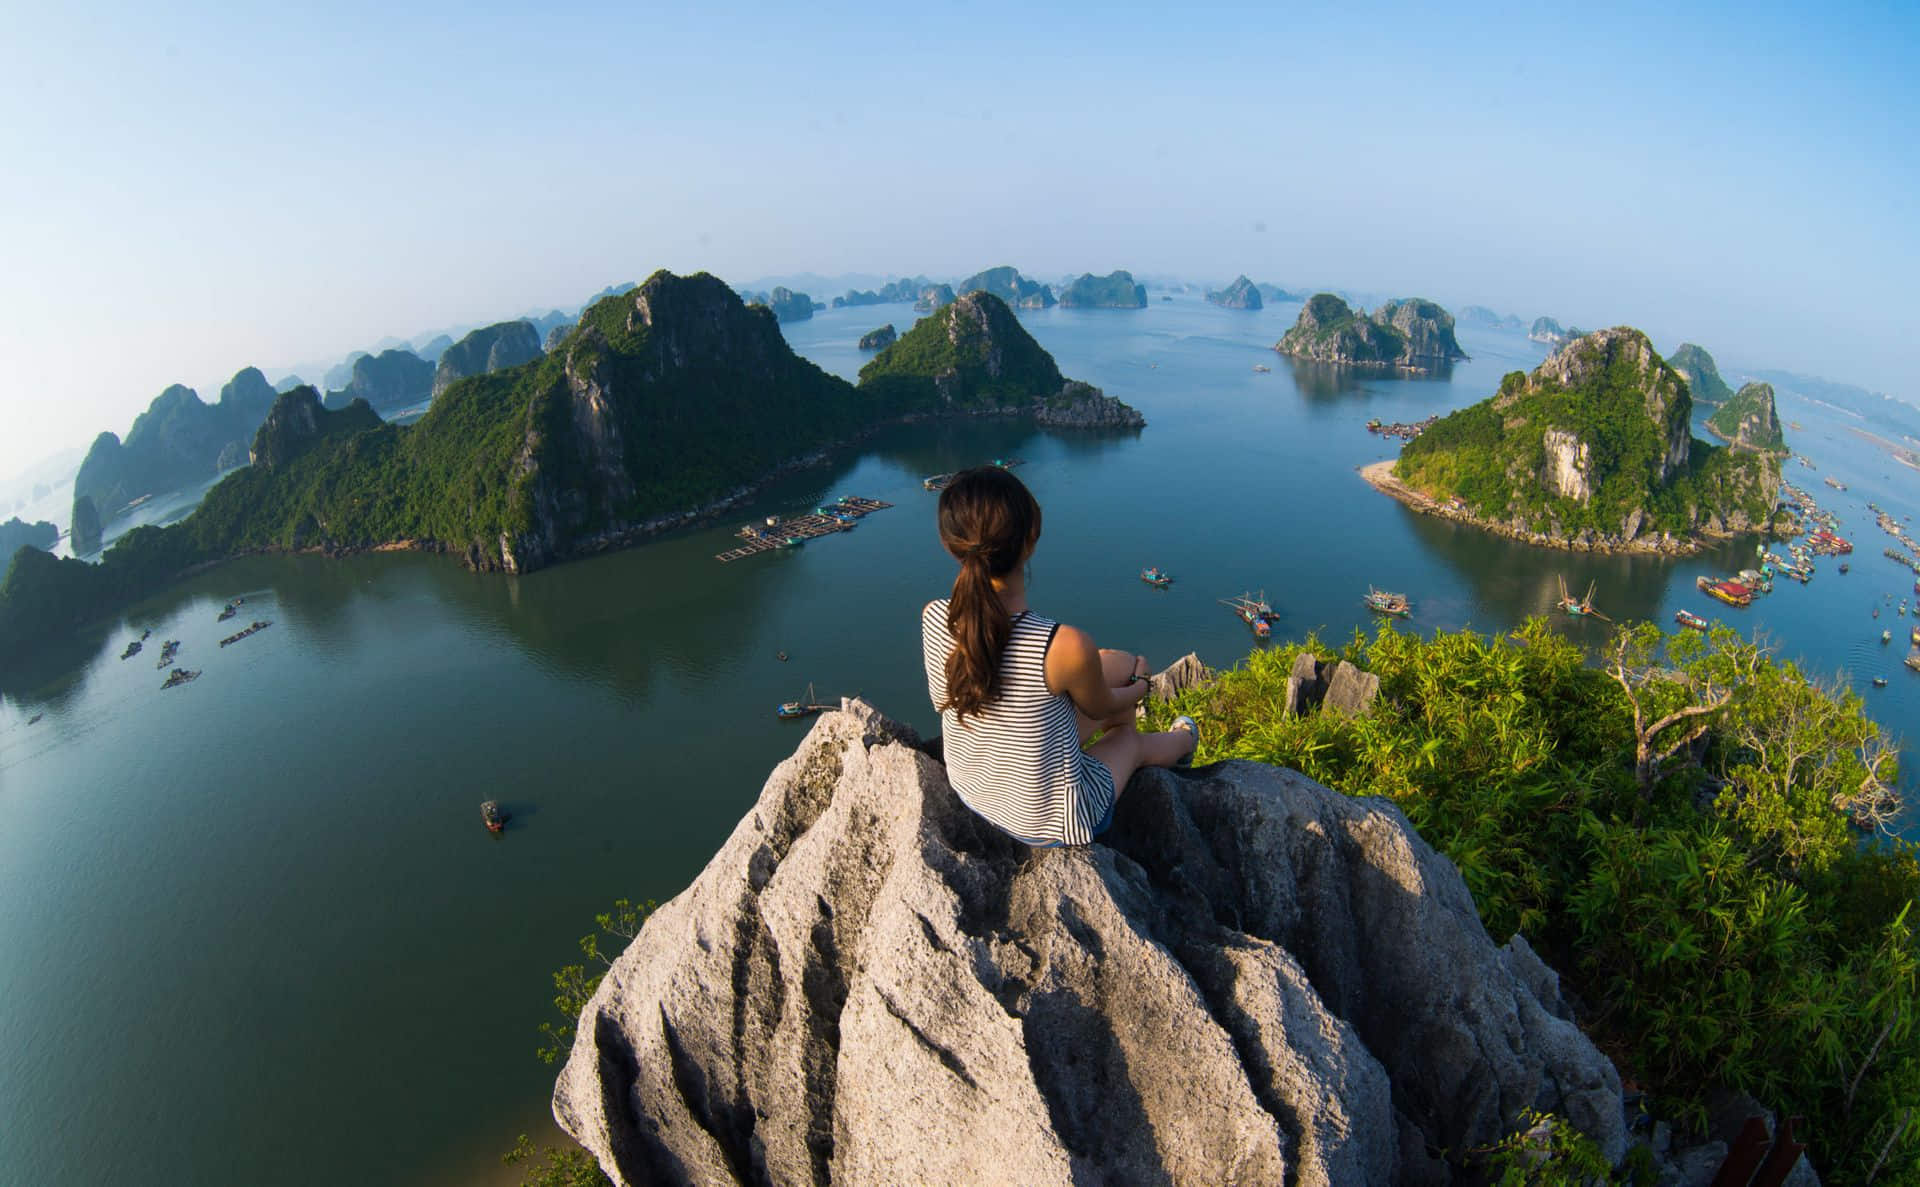 Travel restrictions and advisories while travelling to Vietnam